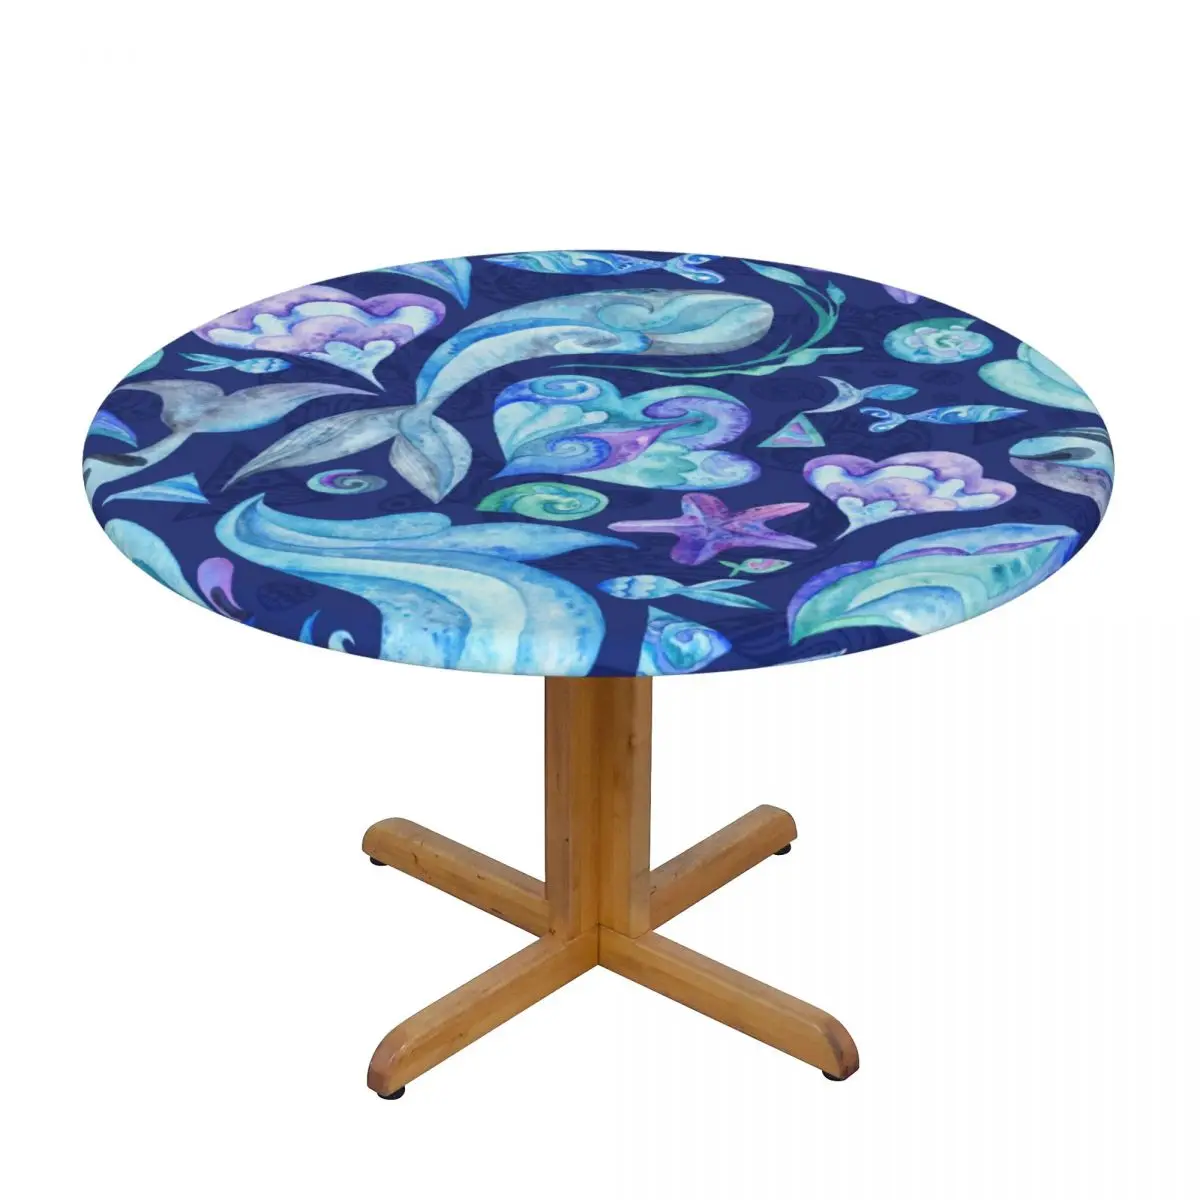 

Modern Round Table Cover Stretch Tablecloths Nautical Underwater Fishes Whales Starfishes Shells Waves Home Decor Table Cloth